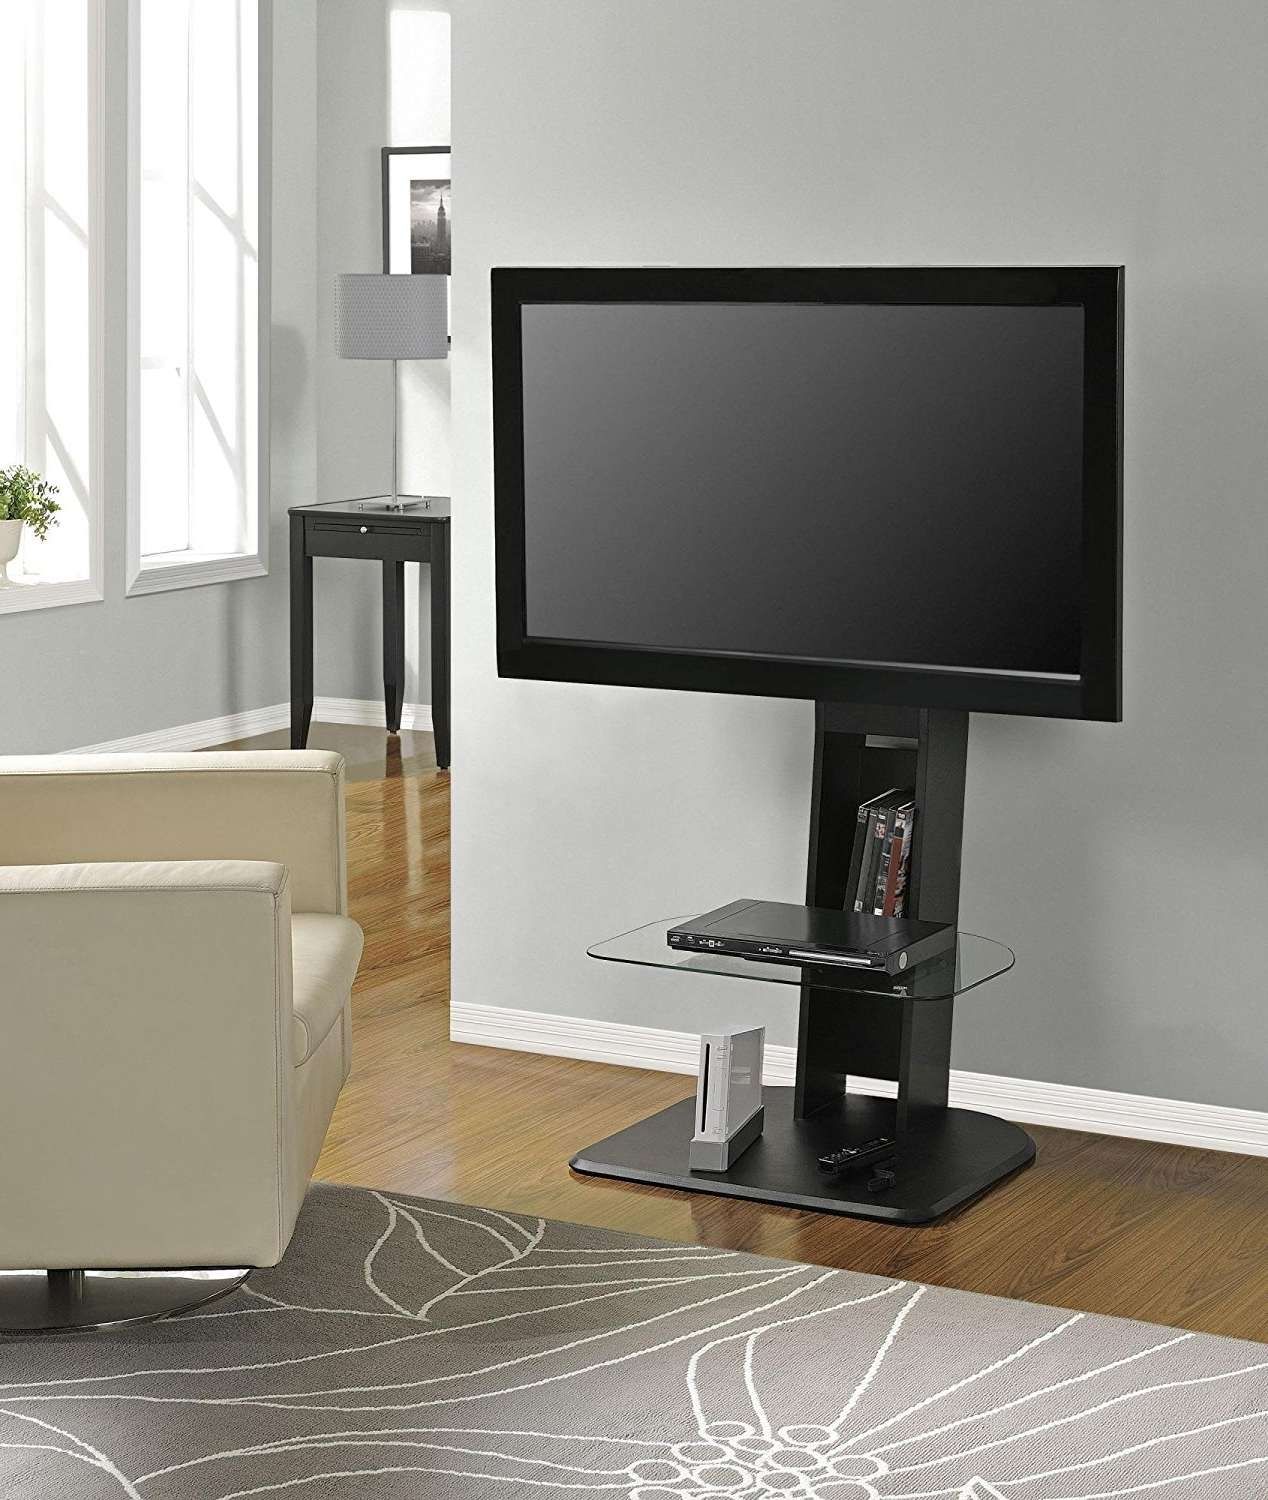 Tv Stand : 32 Unusual 55 Inch Corner Tv Stand With Mount Images Inside Unusual Tv Stands (View 10 of 15)